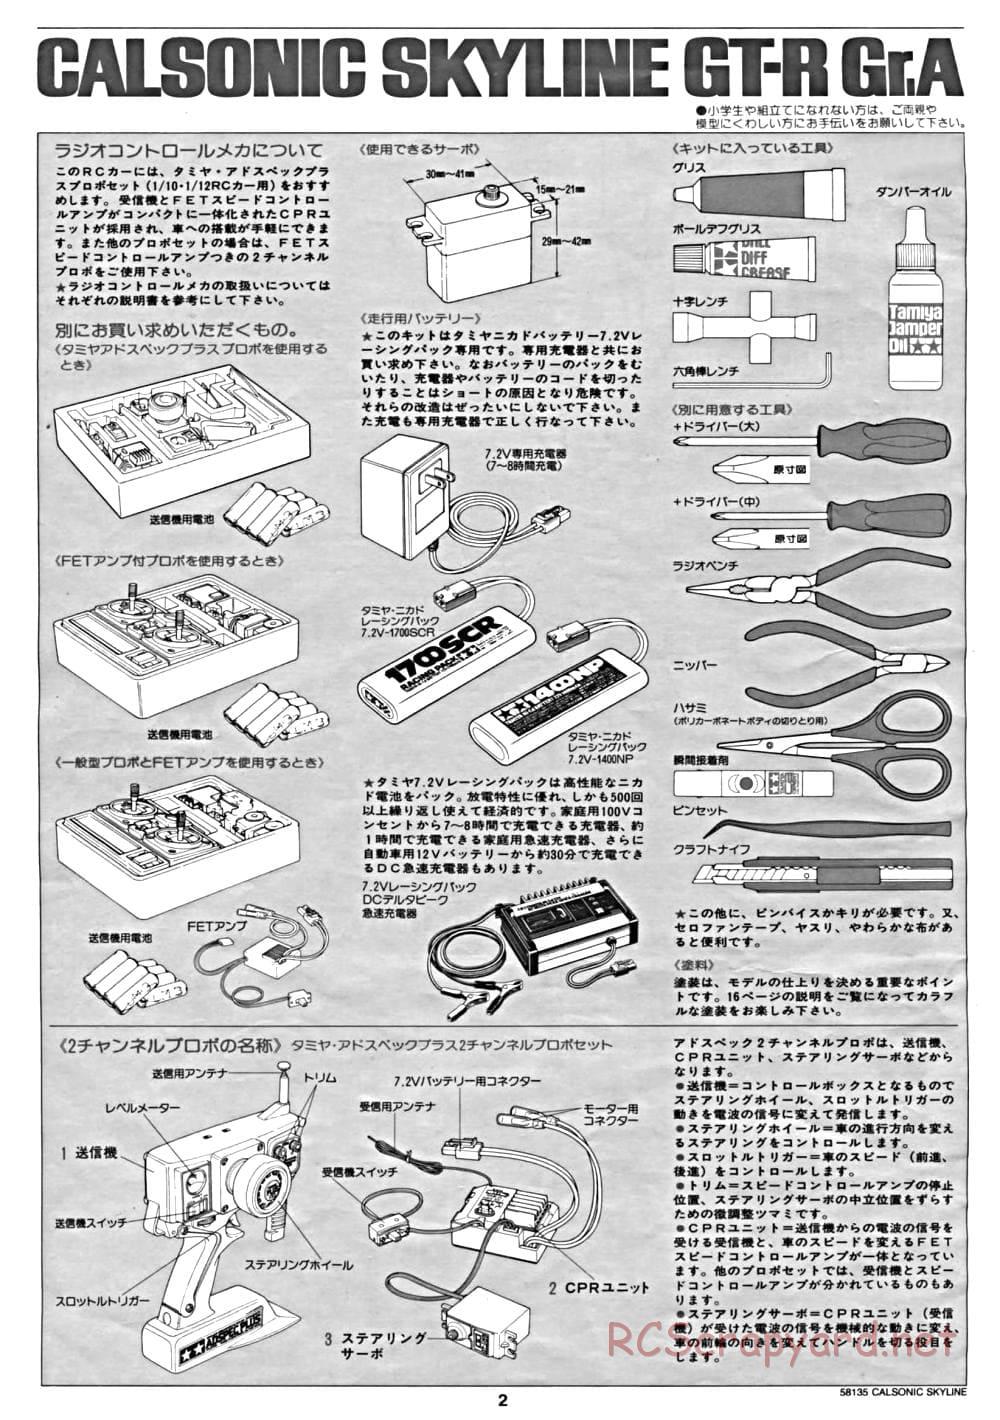 Tamiya - Calsonic Skyline GT-R Gr.A - TA-02 Chassis - Manual - Page 2